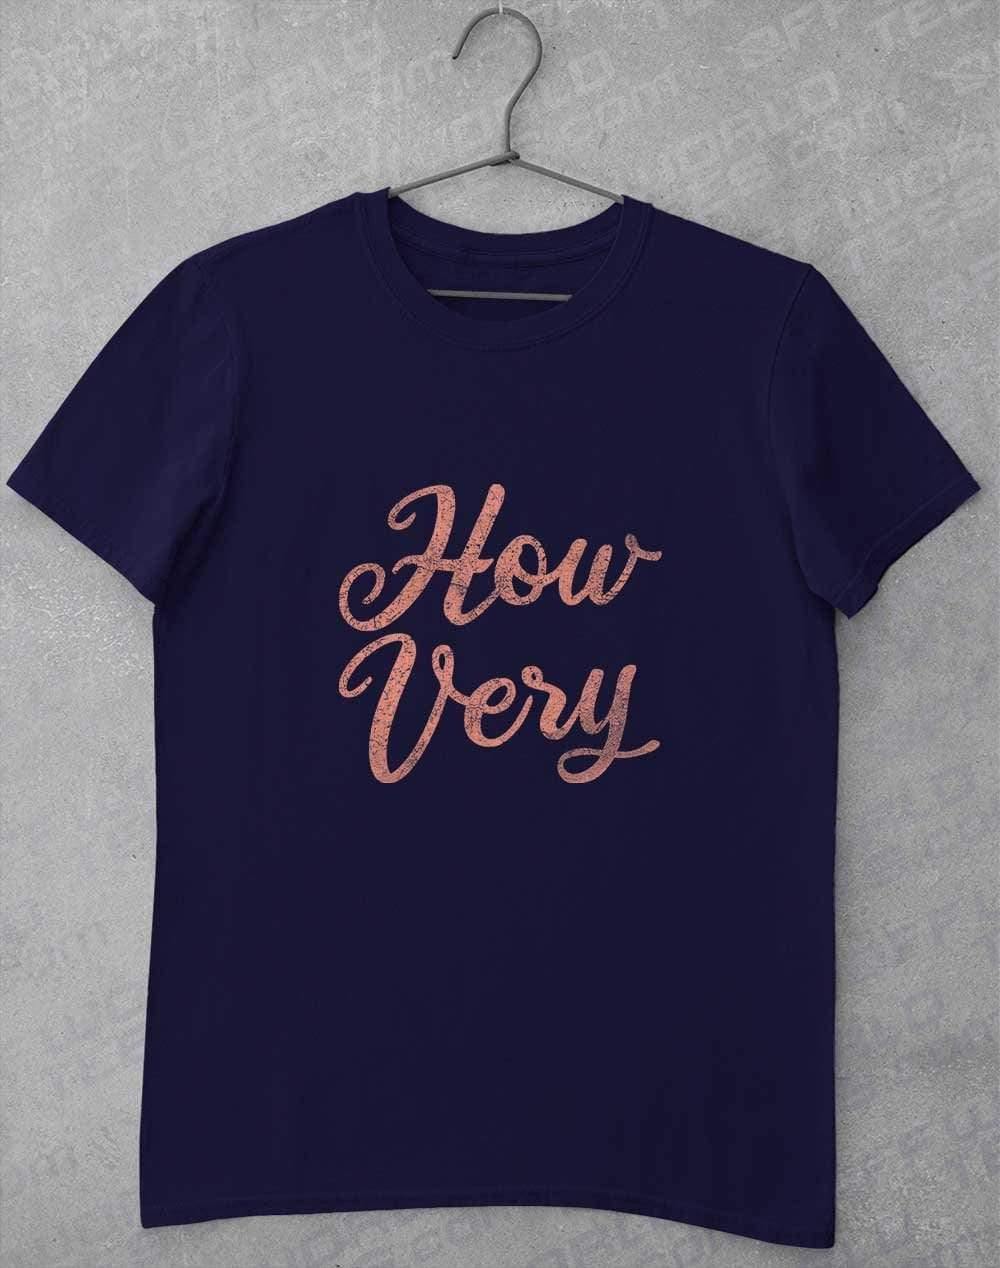 How Very T-Shirt S / Navy  - Off World Tees